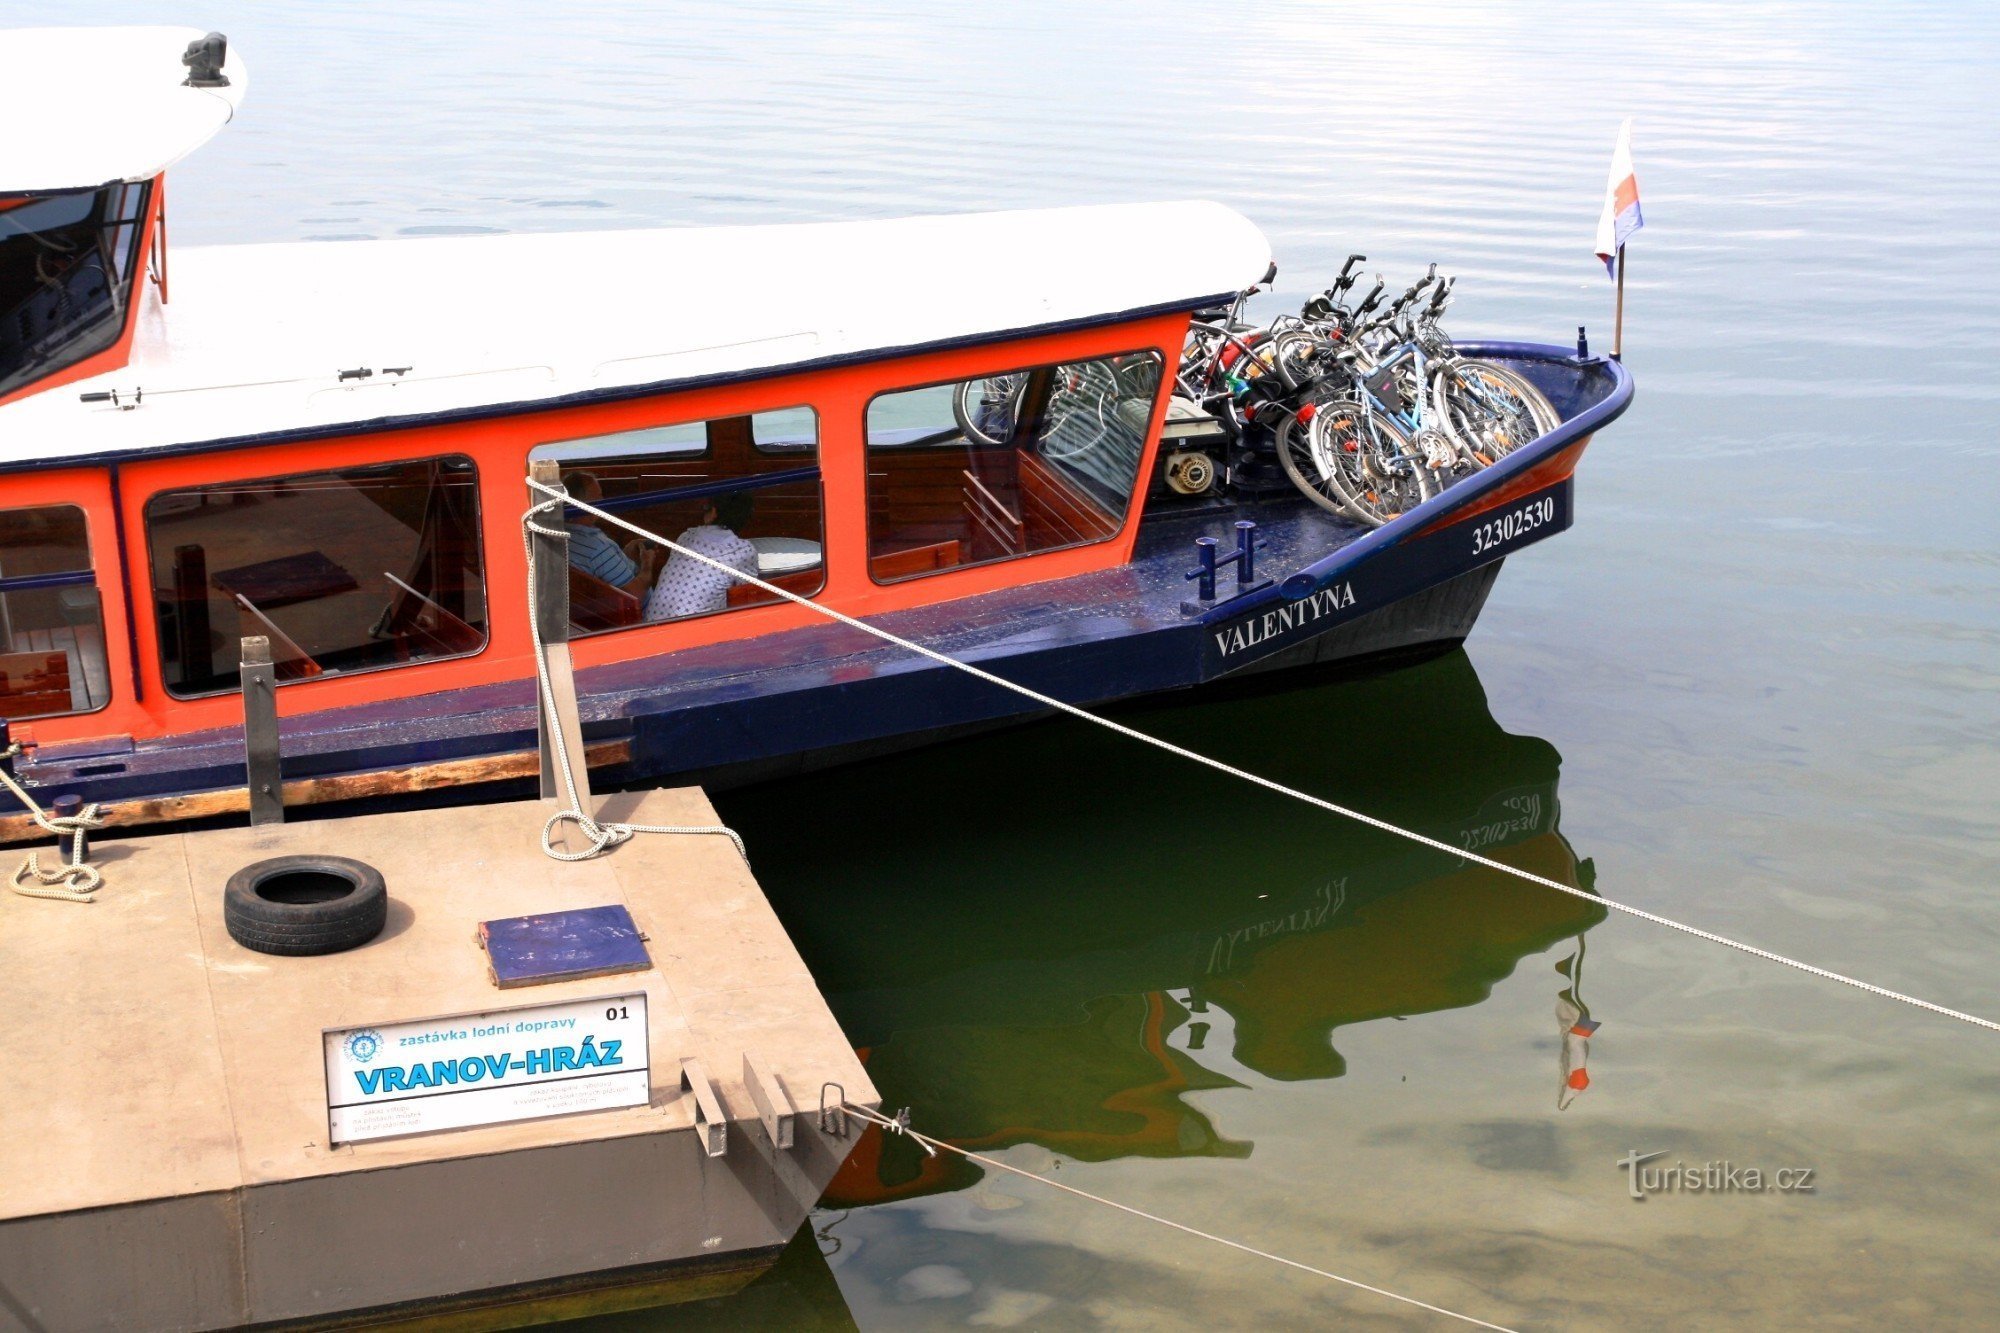 The front part of the boat serves as a storage space for bikes